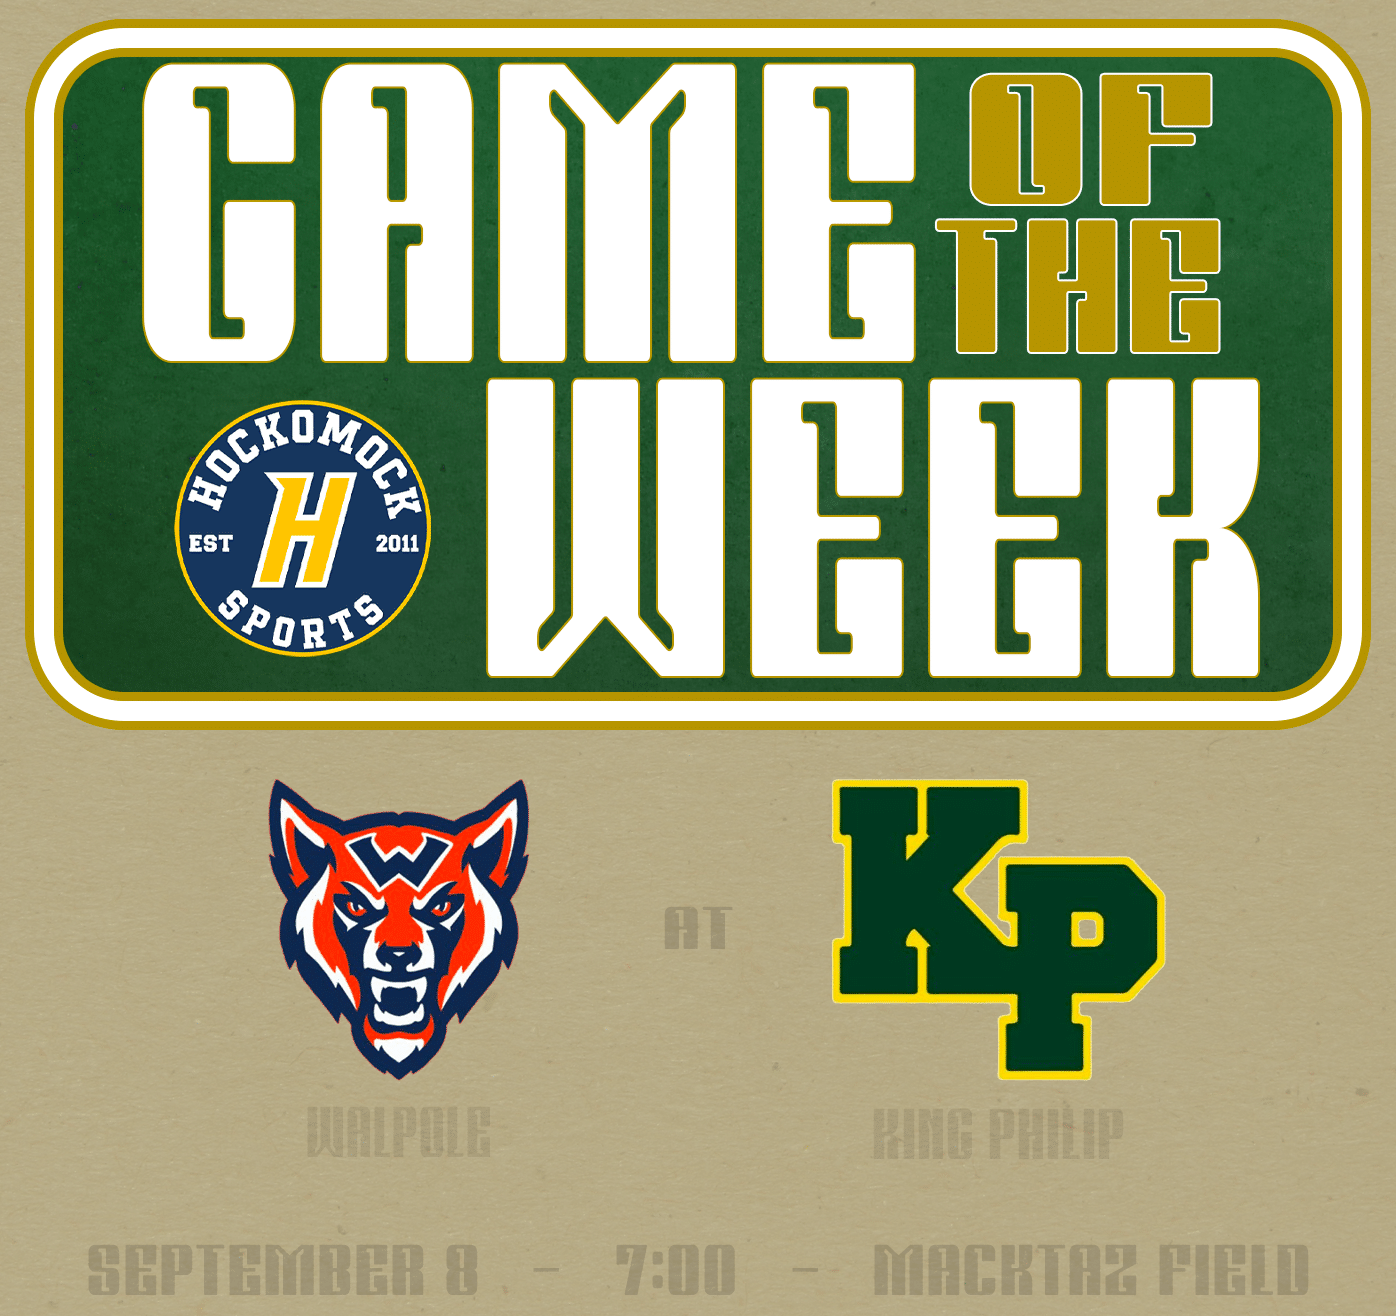 Game of the week